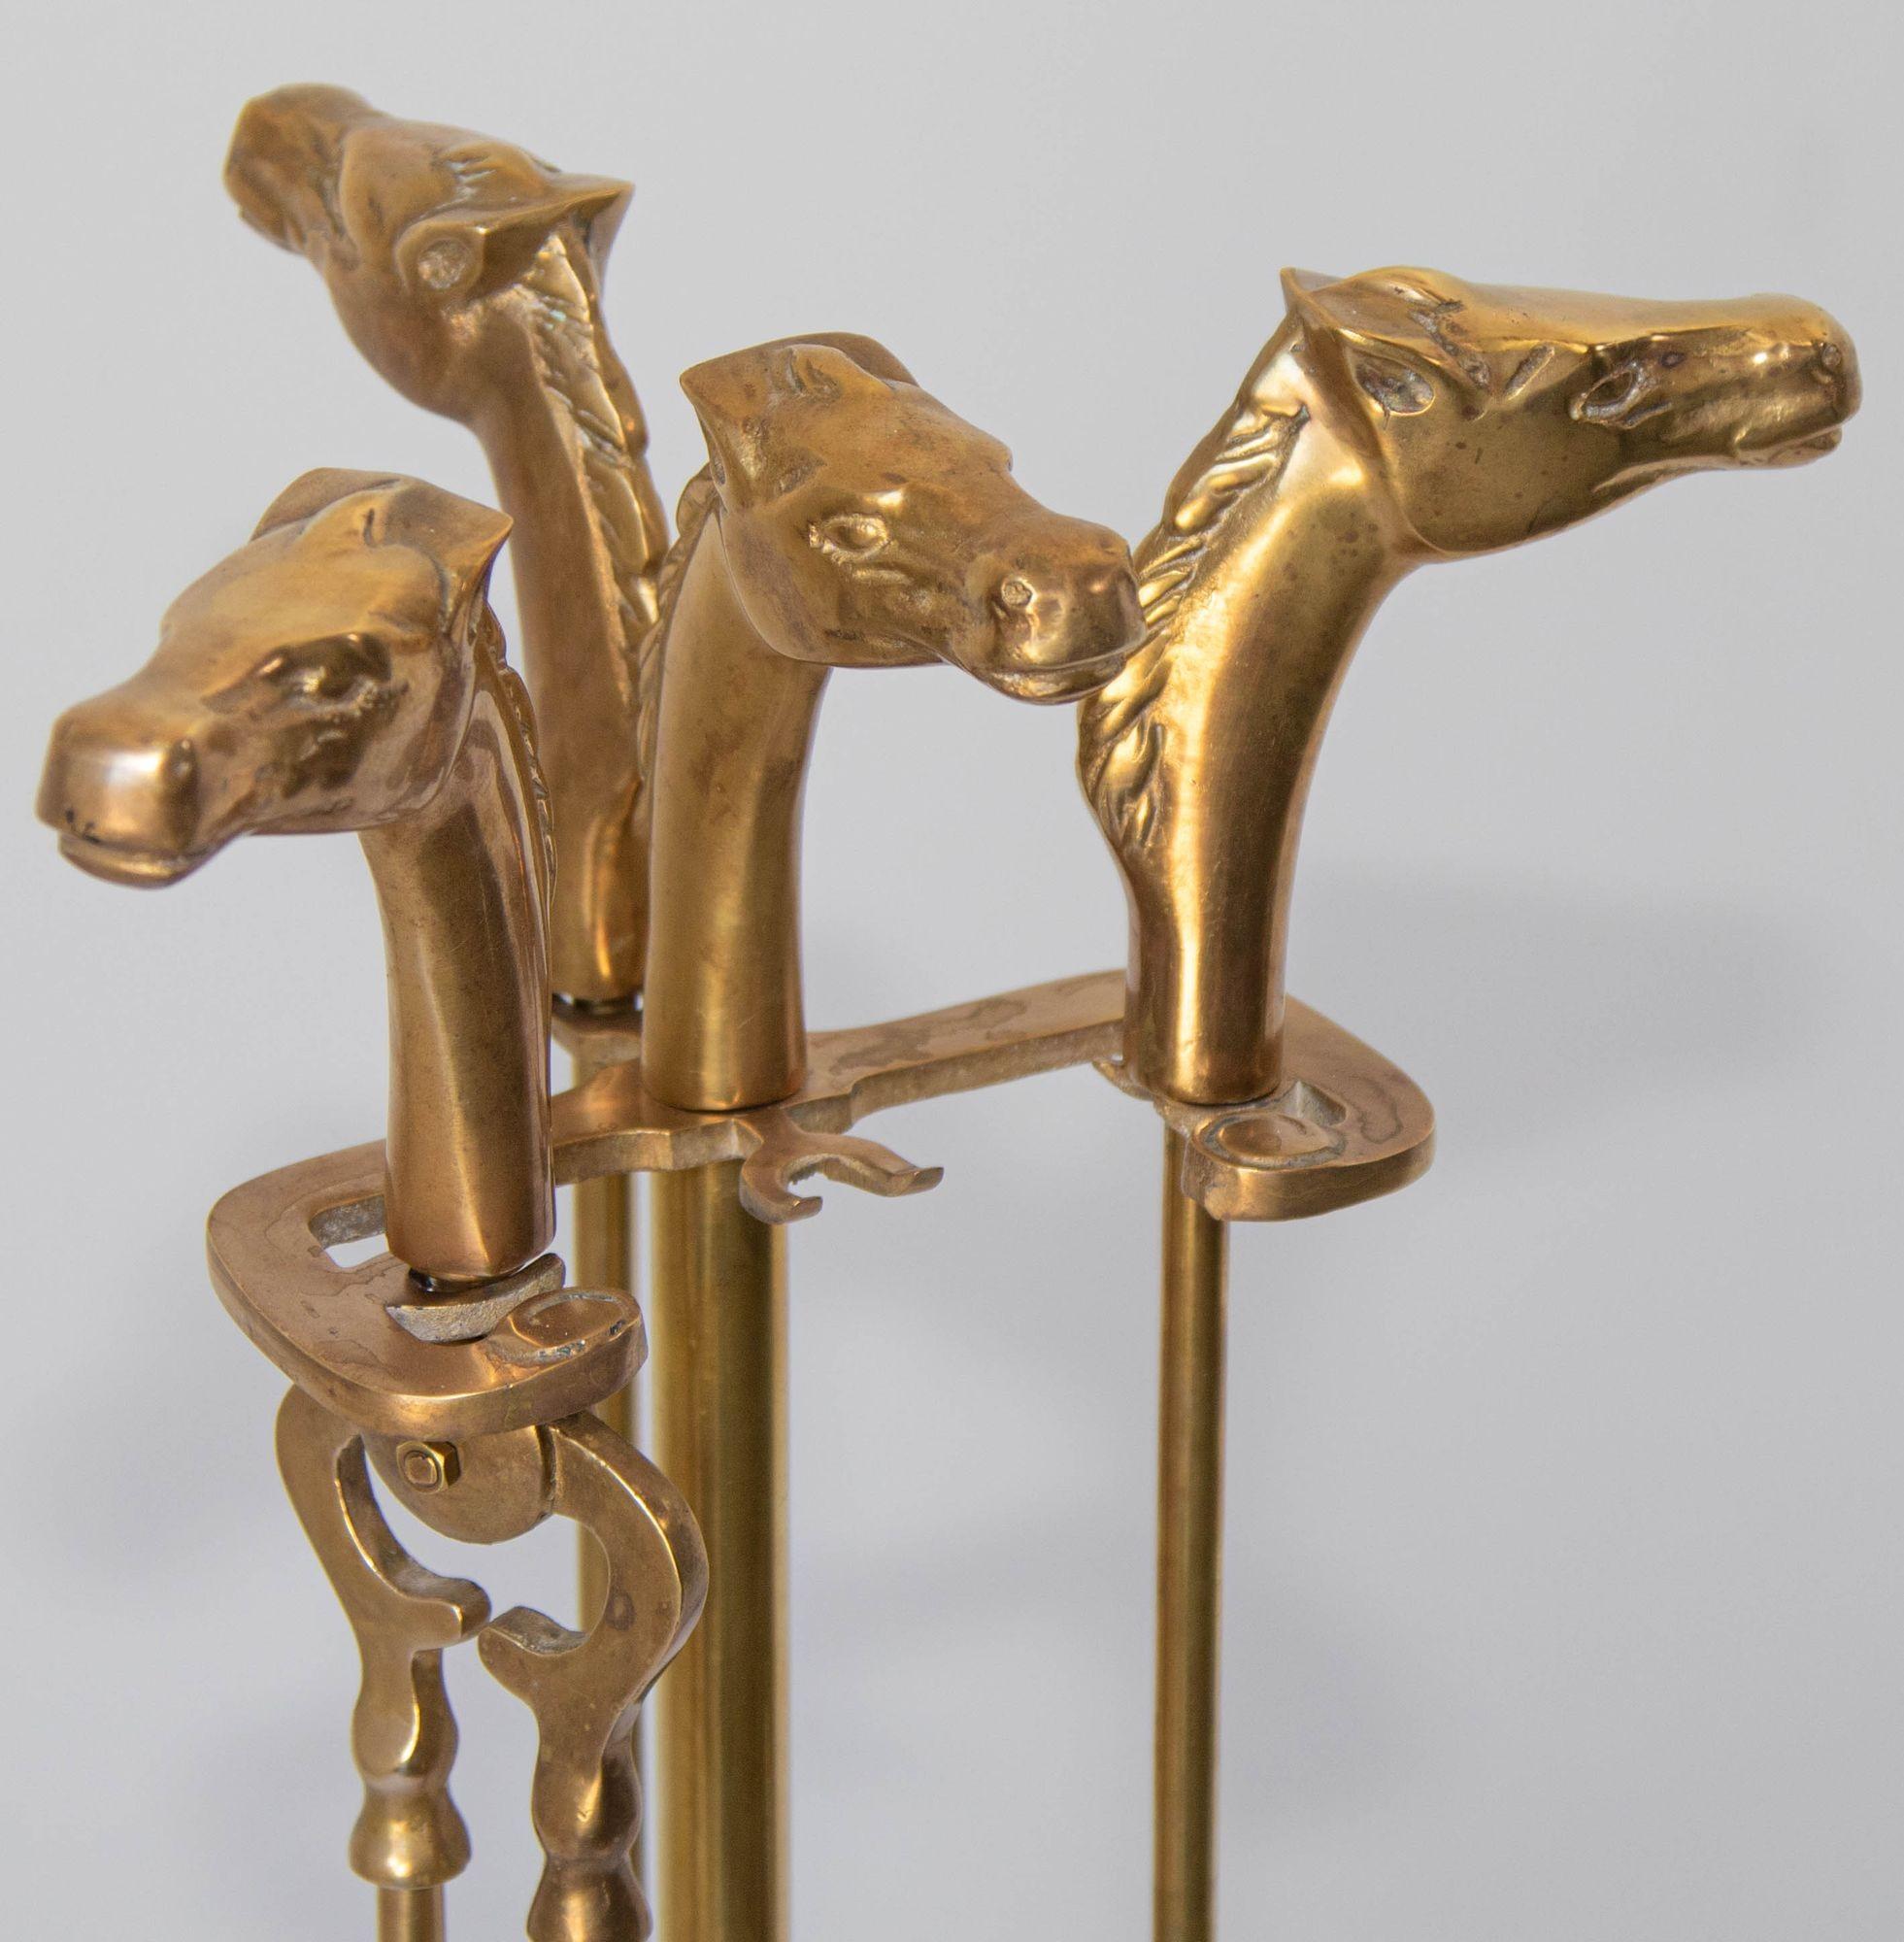 Hollywood Regency Vintage French Brass Fireplace Tools Set with Horse Head Motif, 1950s